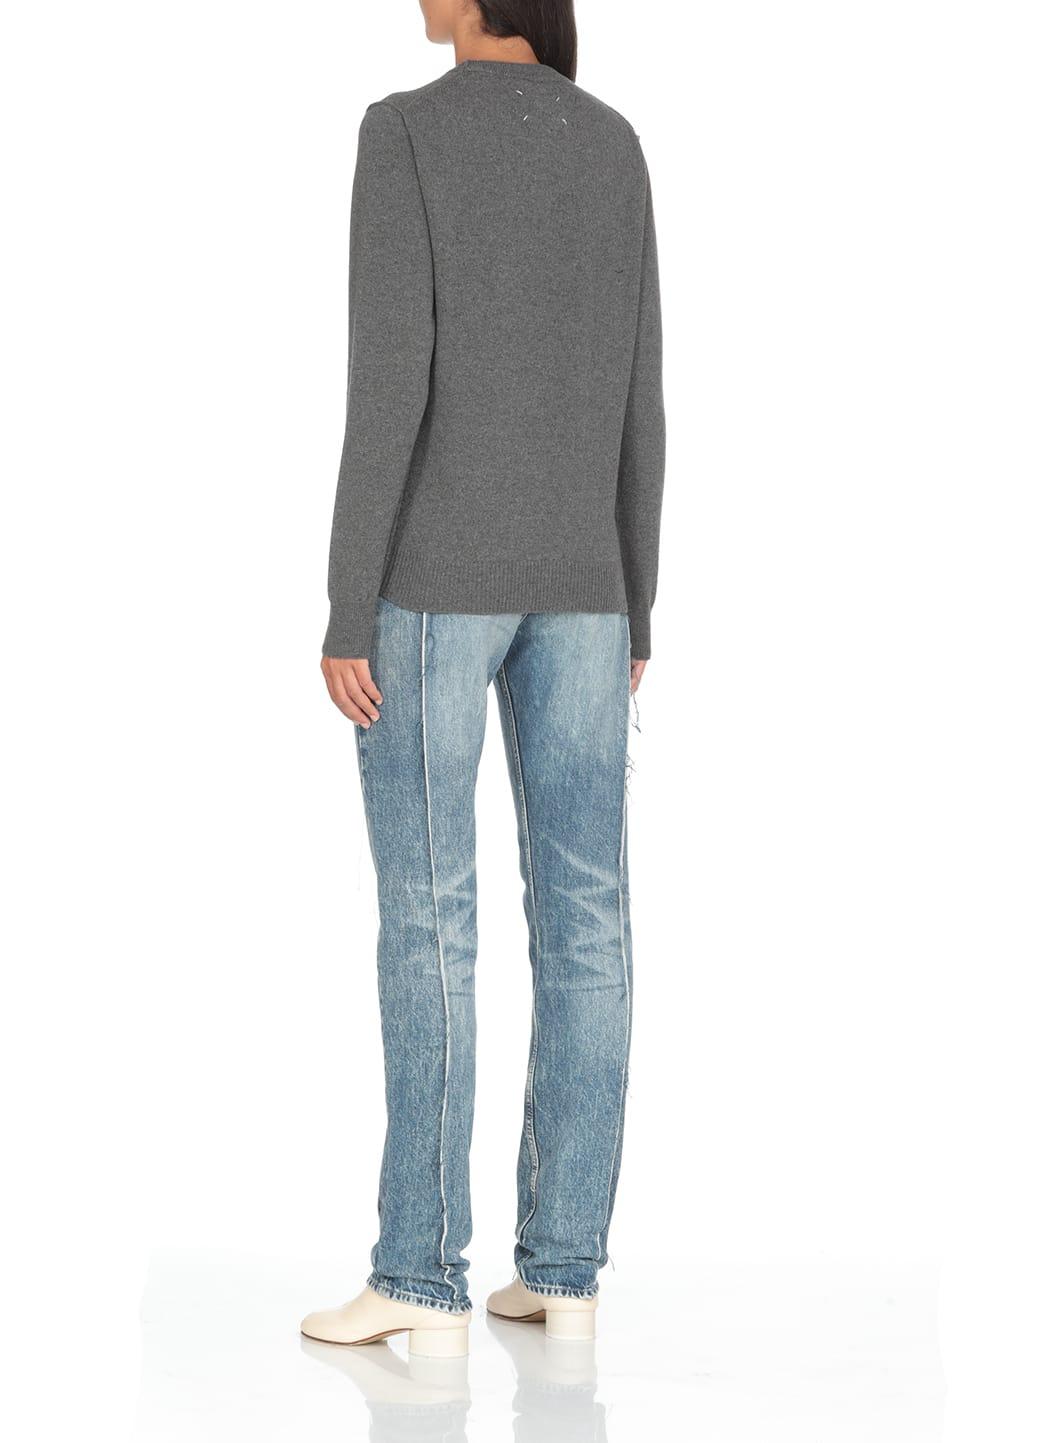 Maison Margiela Cashmere Sweater in Gray | Lyst